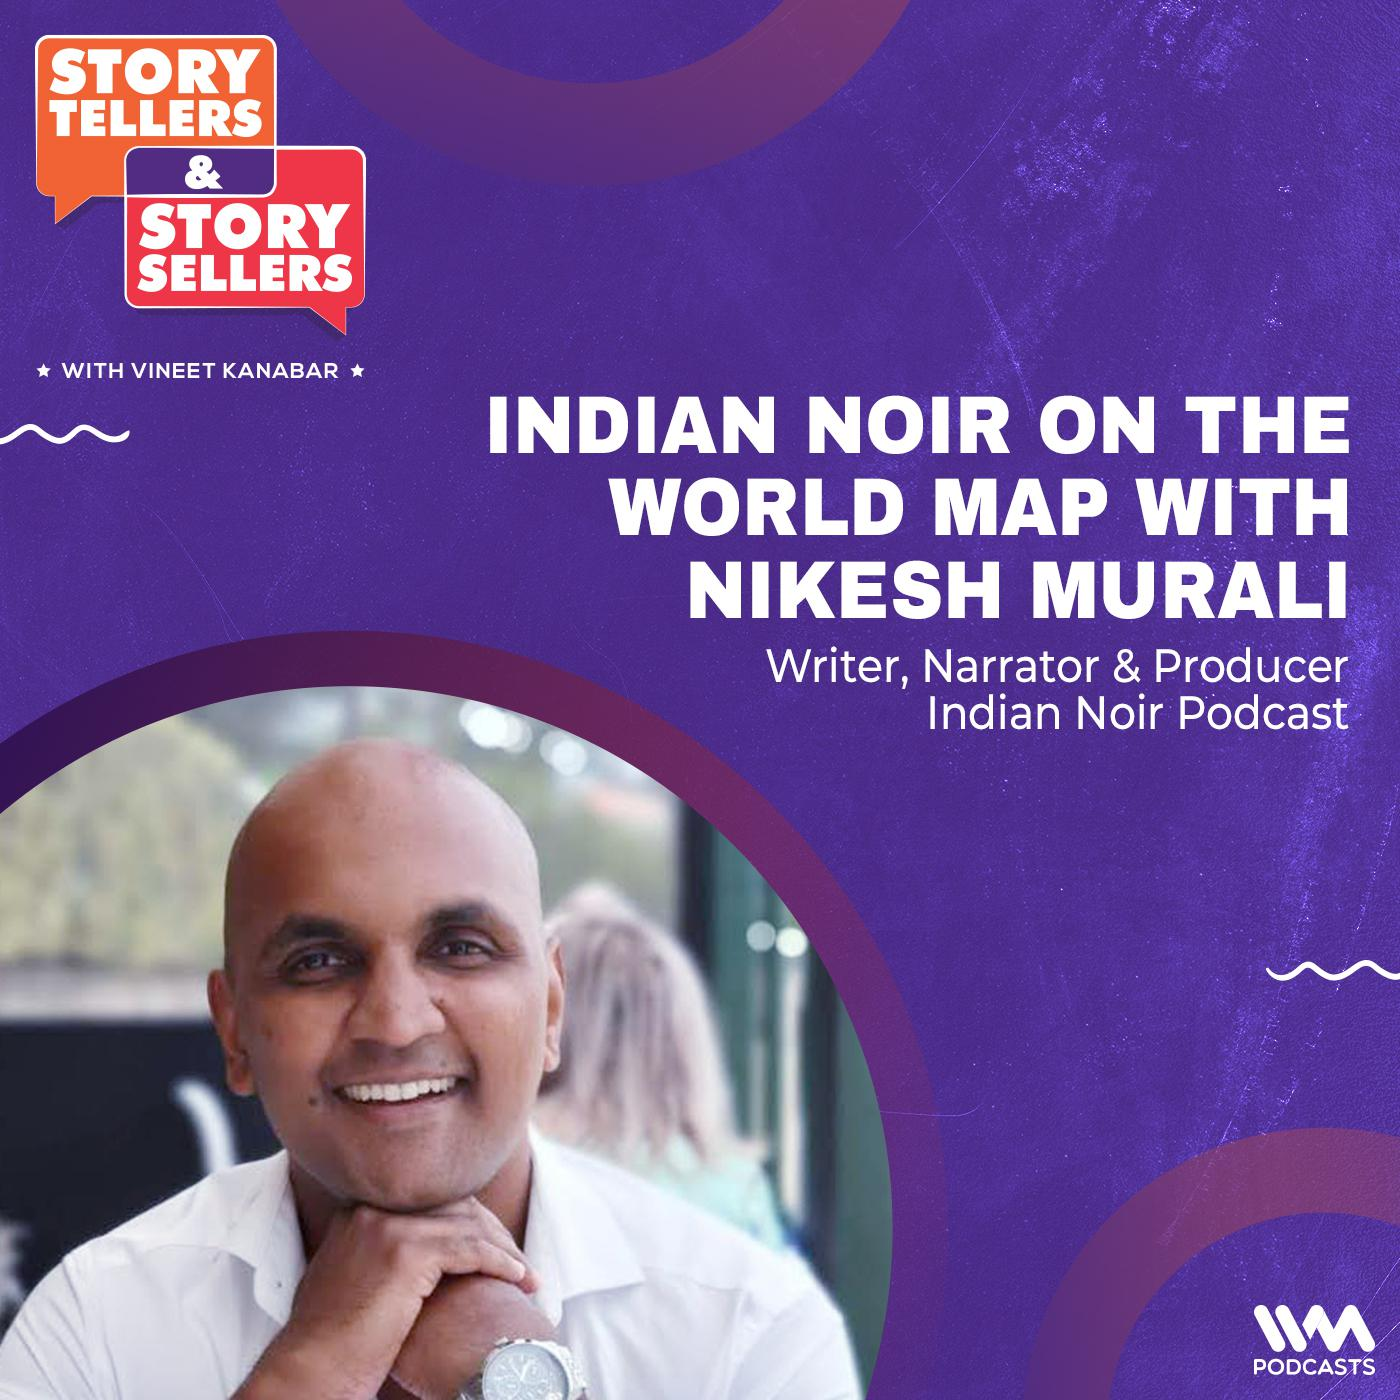 Indian Noir on the World Map with Nikesh Murali